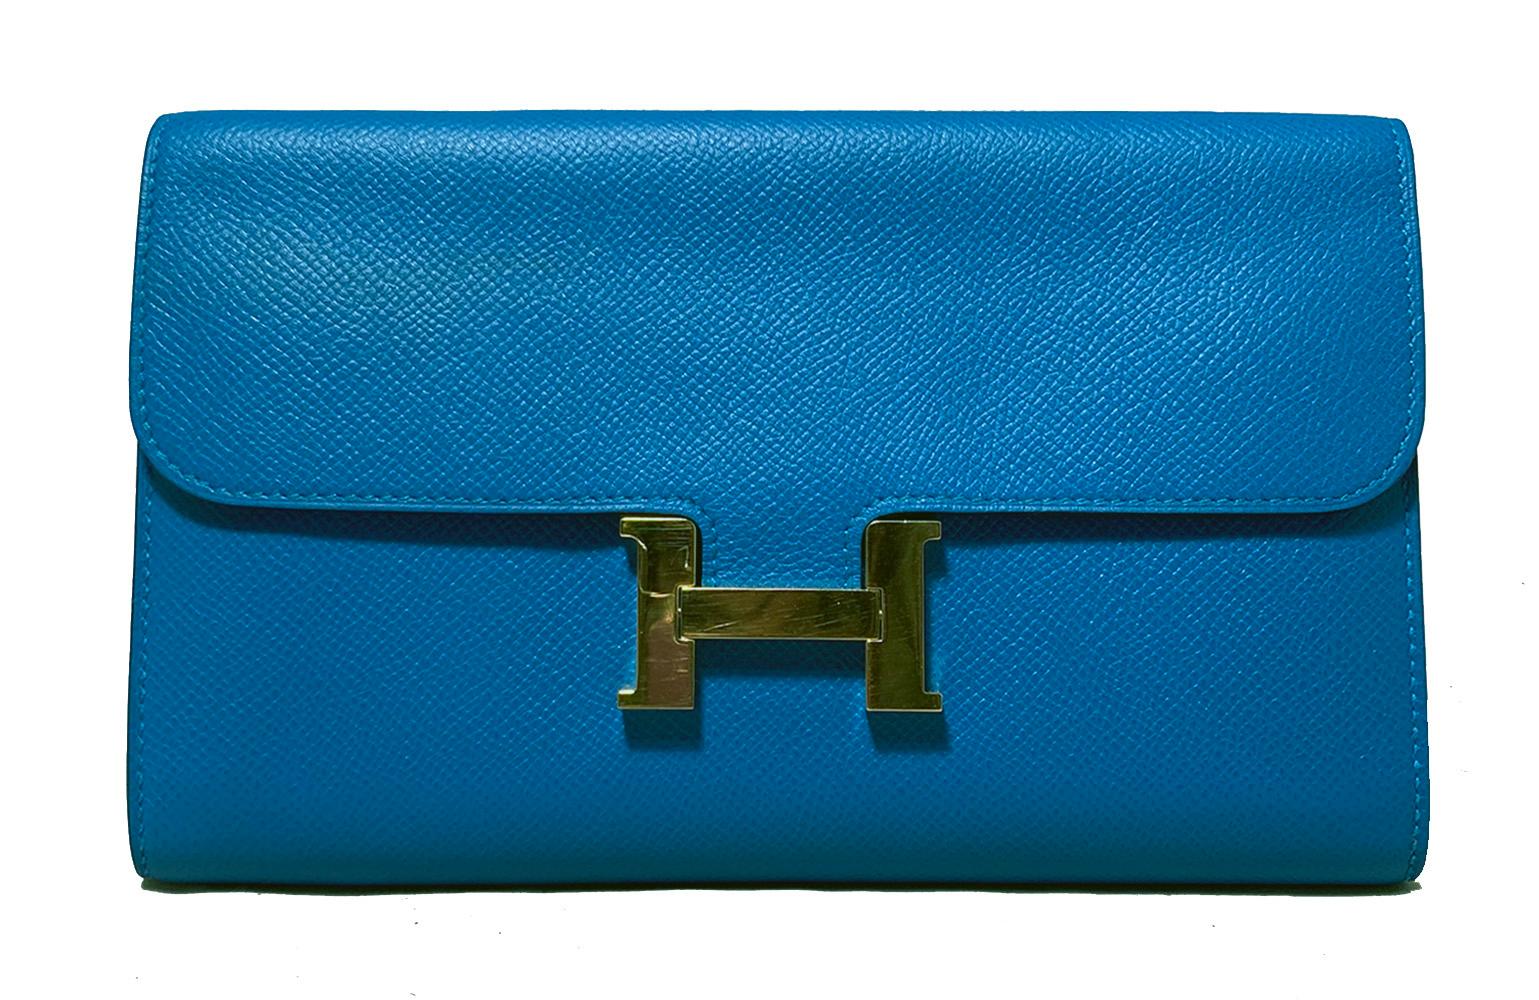 Hermes Constance Long Wallet Blue Epsom in excellent condition. Blue epsom leather exterior trimmed with shining gold signature H hardware along front side. Lift latch top flap closure opens to a matching blue interior with 12 credit card slots, 2